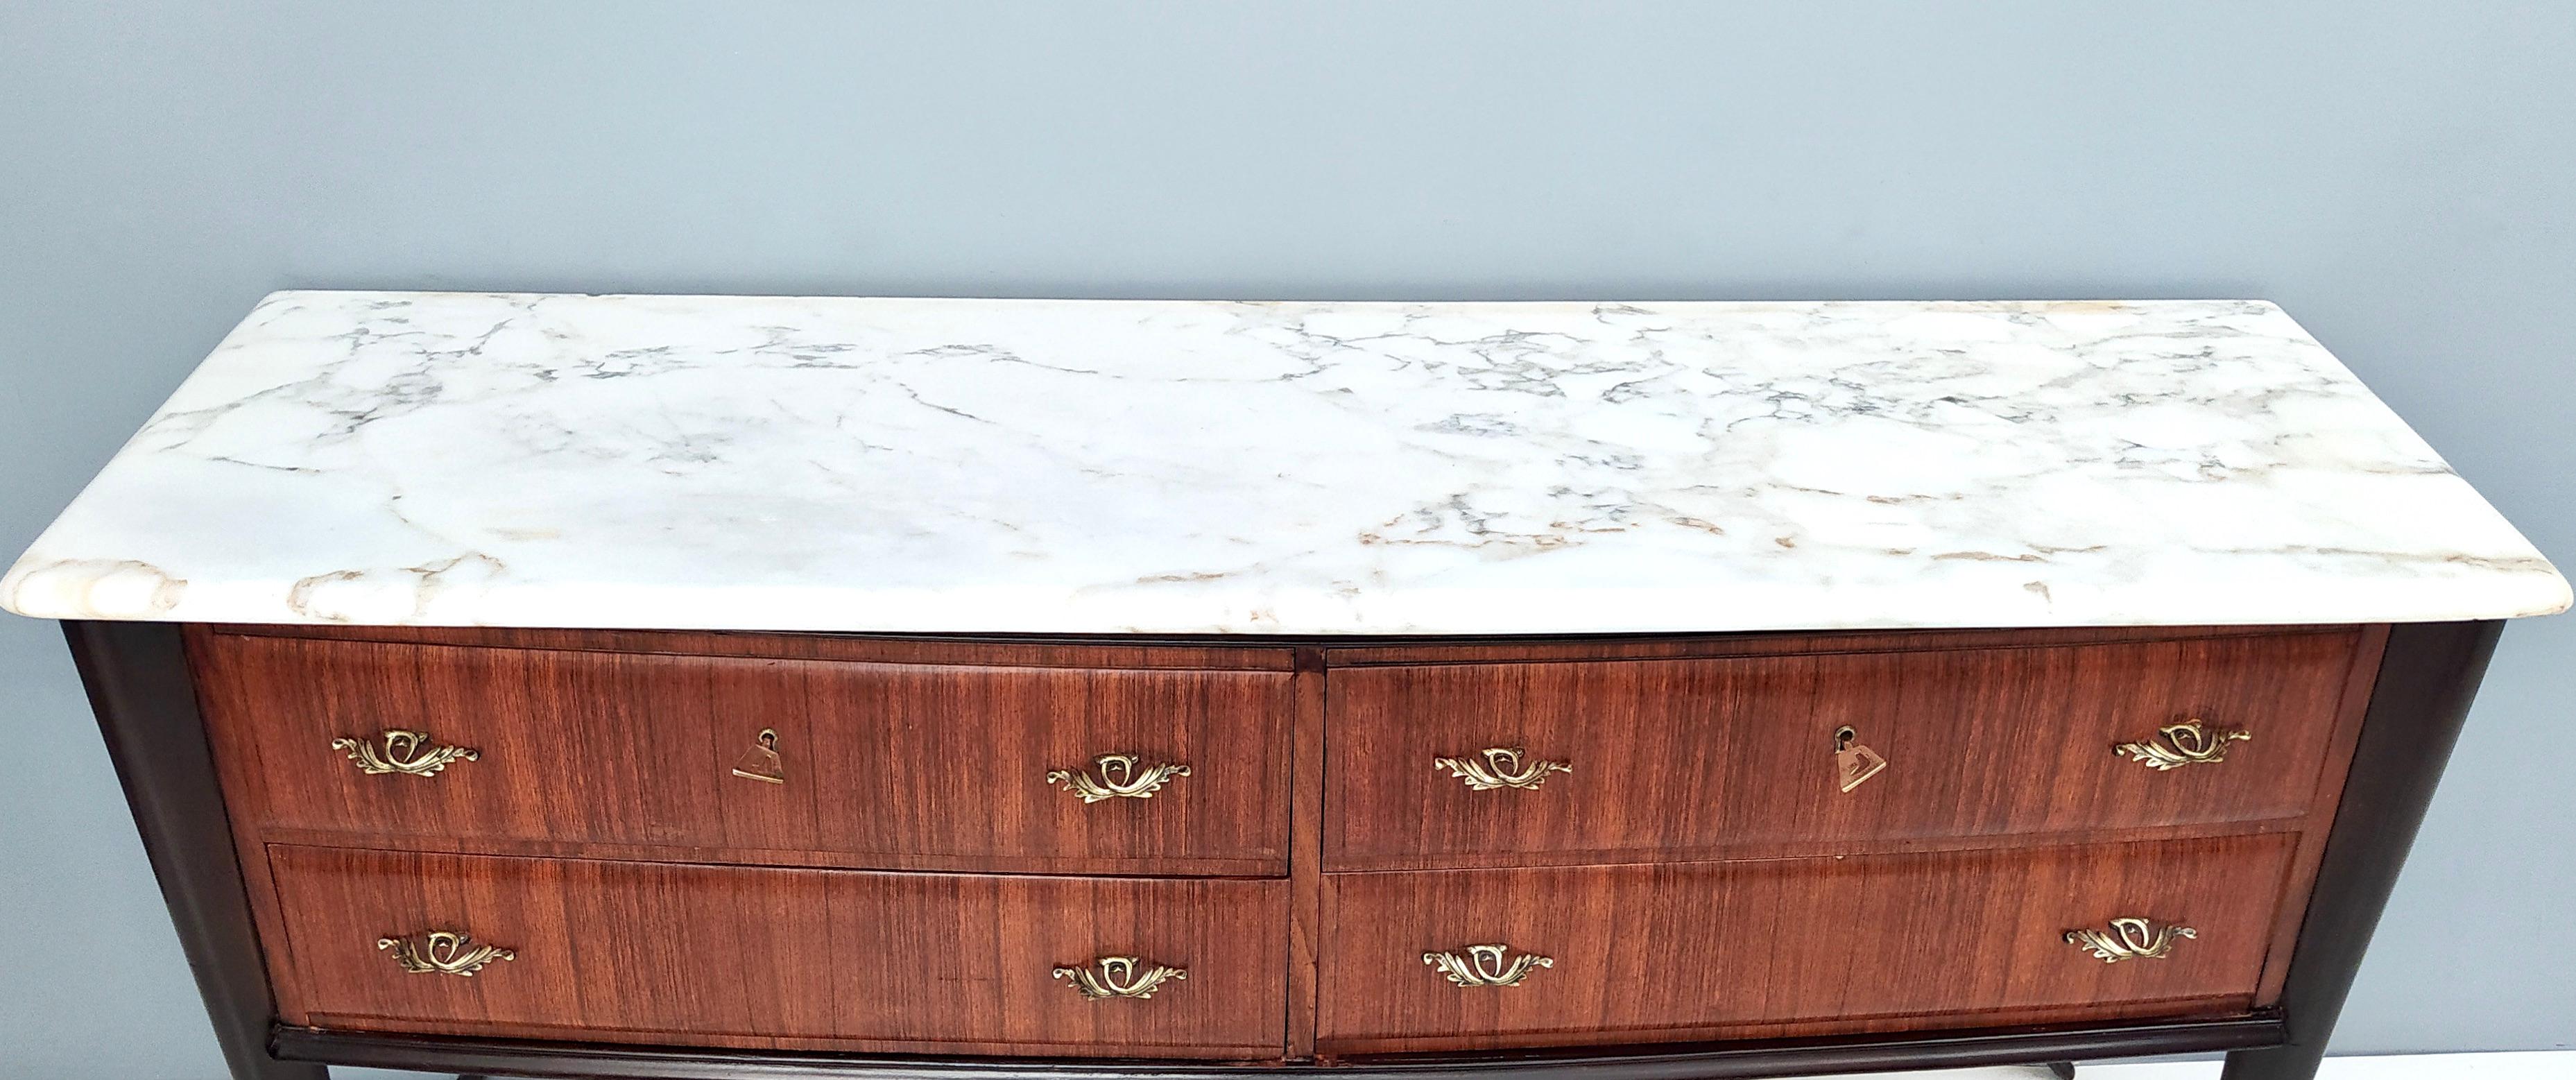 Vintage Black Walnut Dresser Produced by Dassi with Carrara Marble Top, Italy For Sale 7